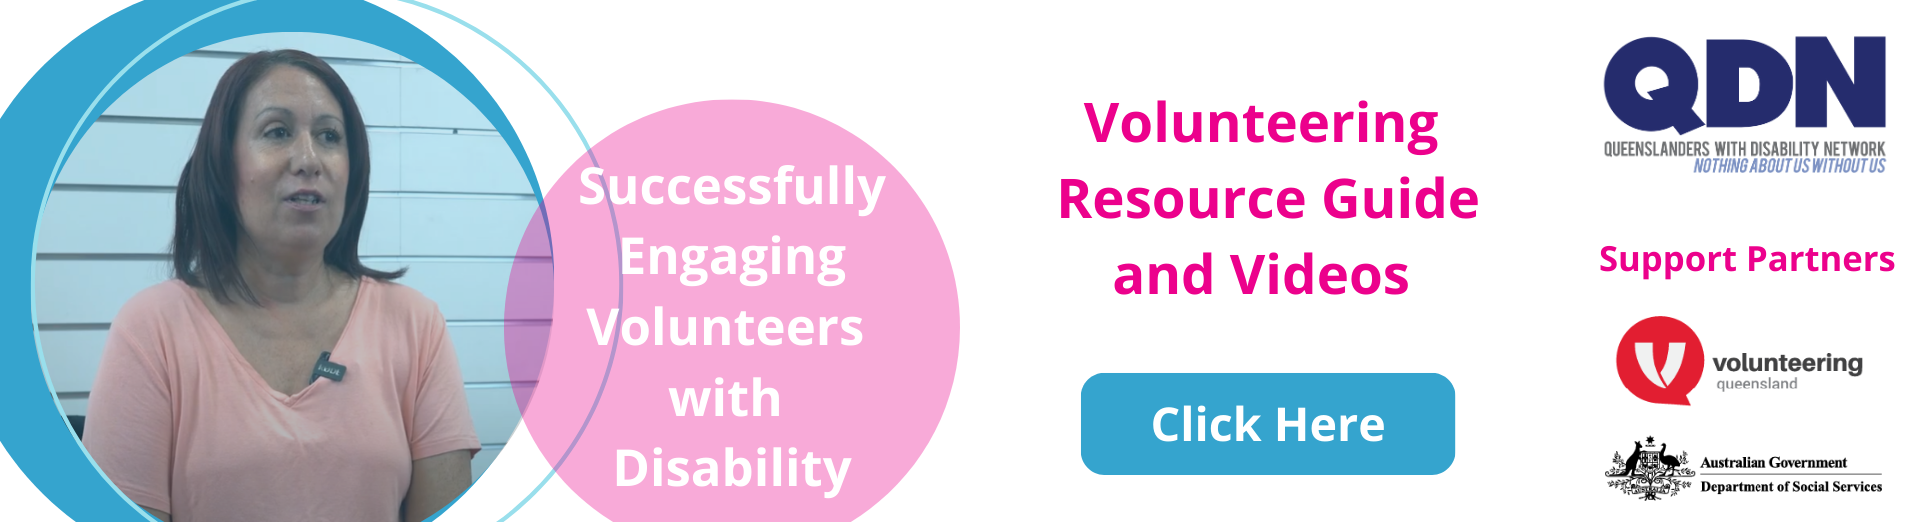 A white background features a blue and red circle frame with a woman speaking directly to the camera. The accompanying text reads, 'Successfully engaging volunteers with disabilities.' There is a 'Click Here' button for Volunteering Resources and Videos. The QDN logo is positioned in the top right corner, alongside the logos for Support Partners Volunteering Queensland and the Australian Government - Department of Social Services.